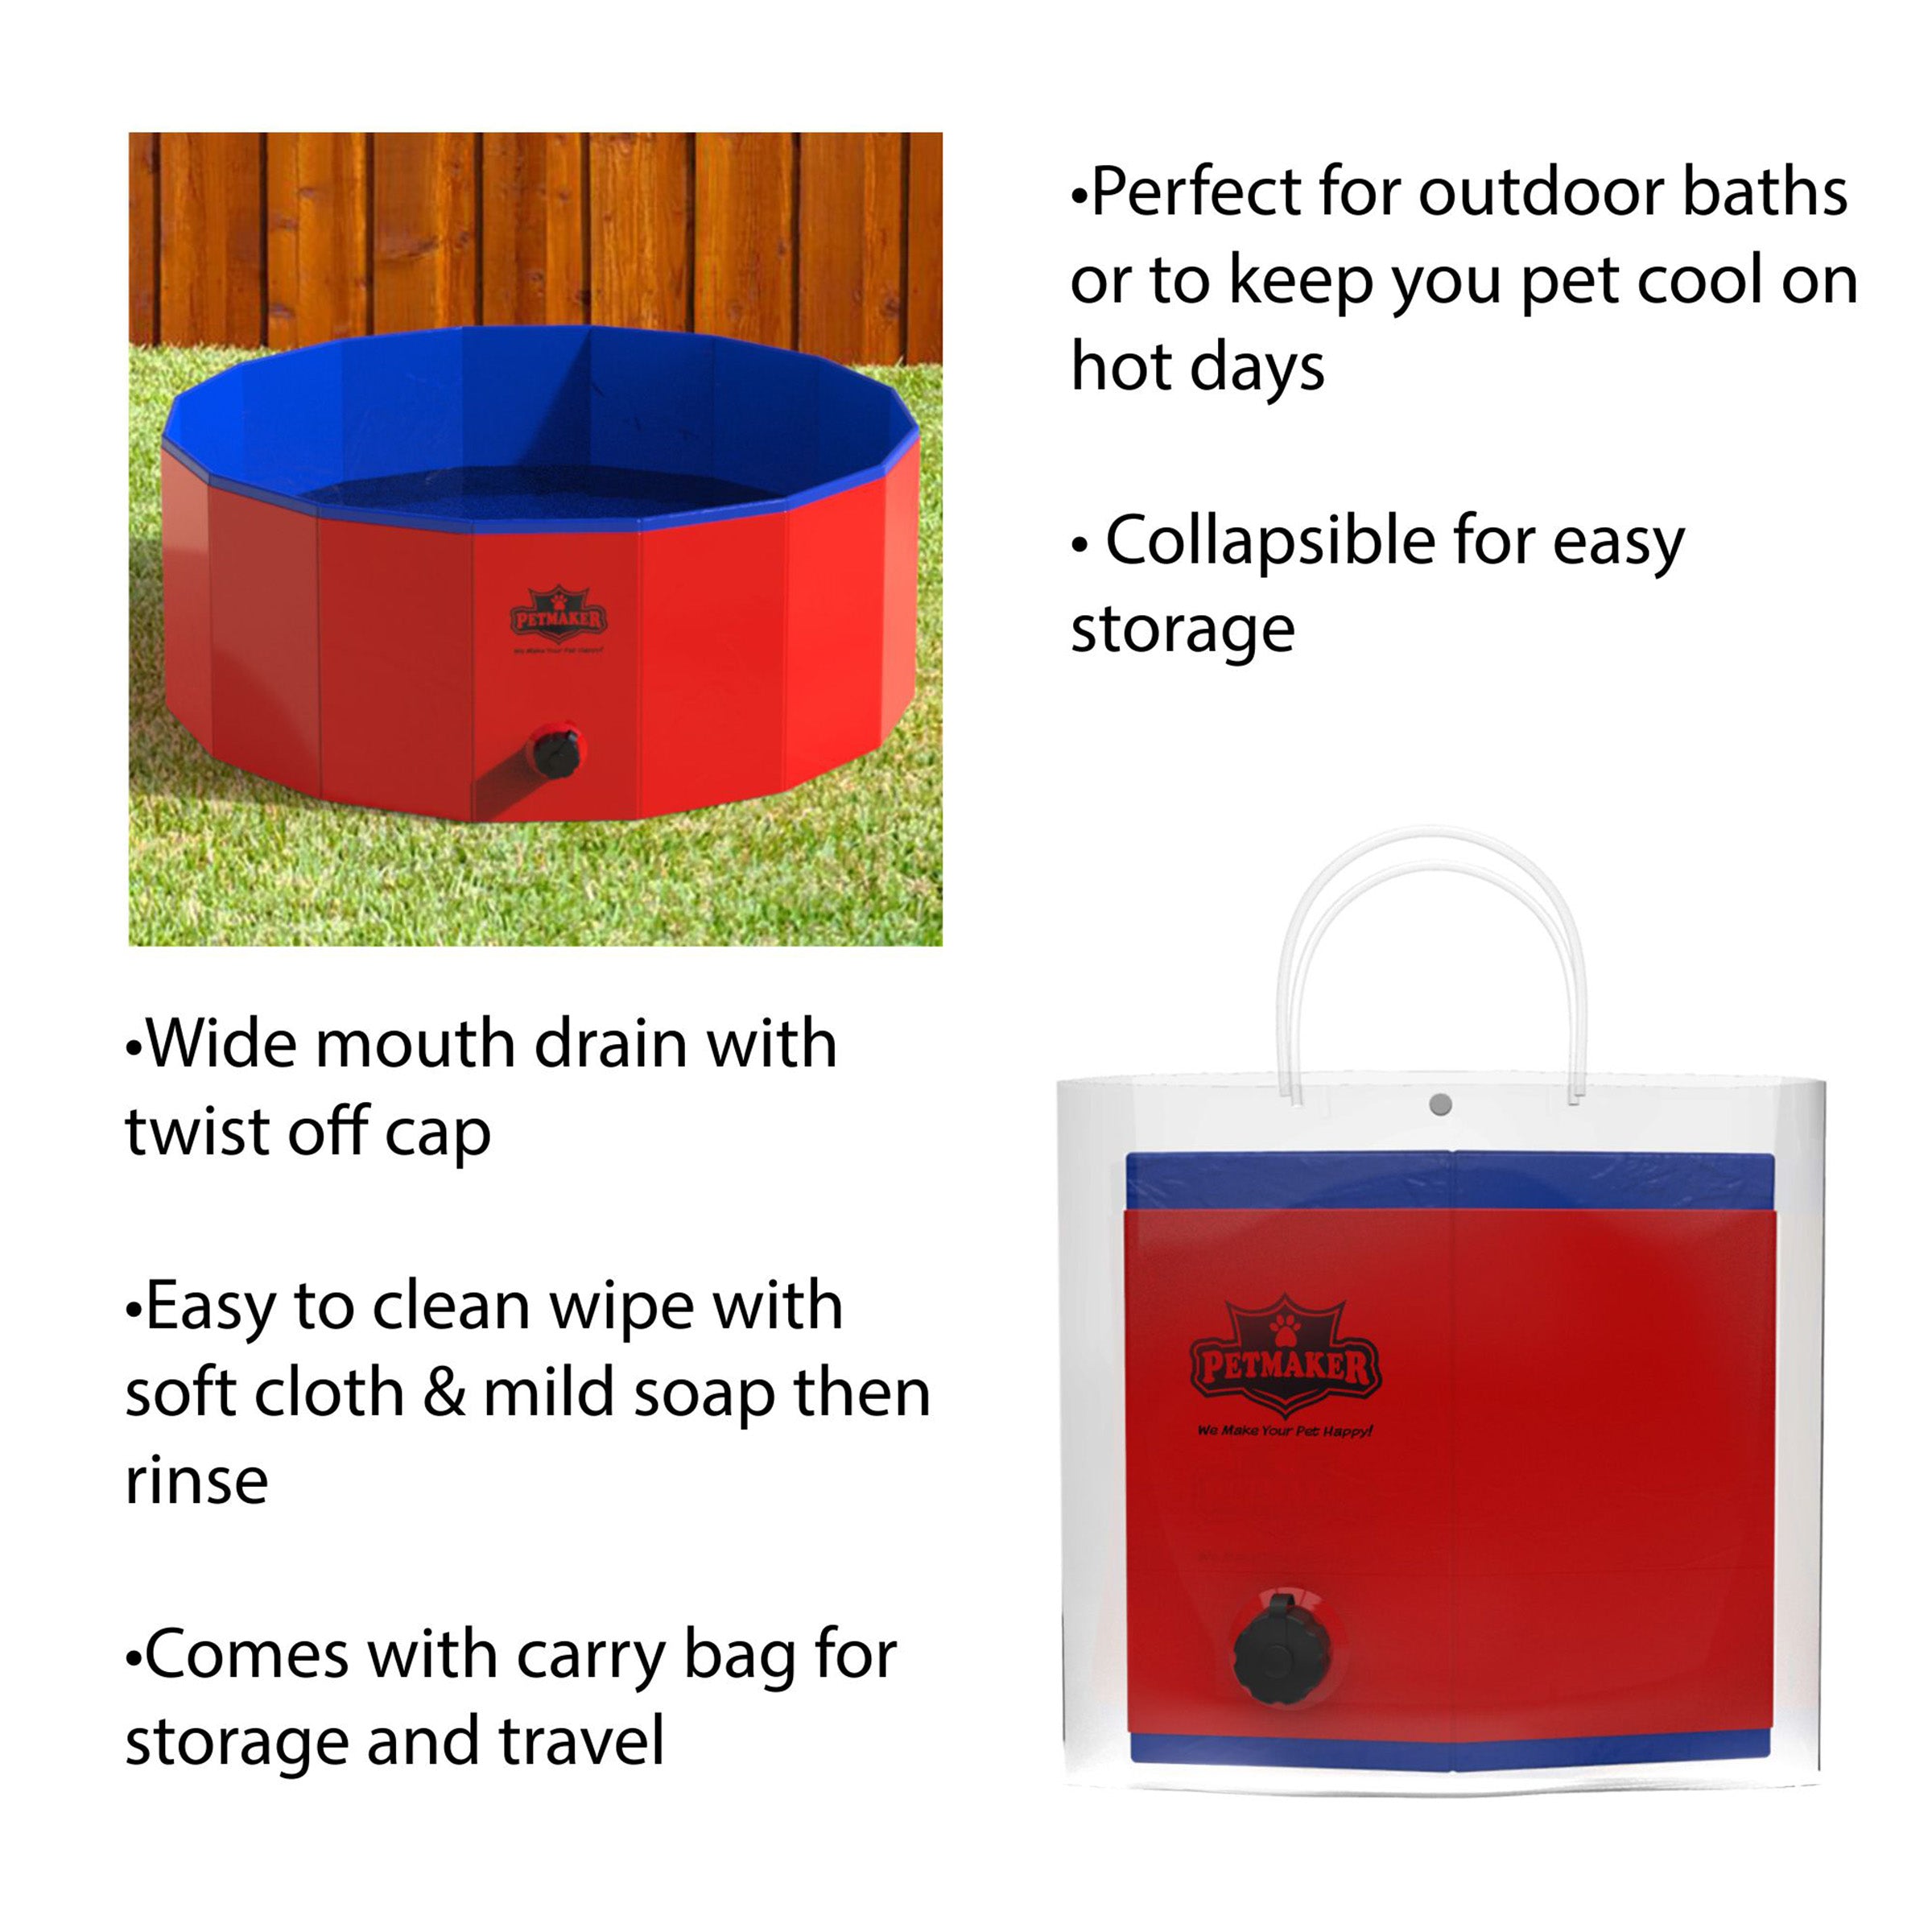 Dog Pool - Portable， Foldable 30.5-Inch Doggie Pool with Drain and Carry Bag - Pet Swimming Pool for Bathing or Play by PETMAKER (Red)